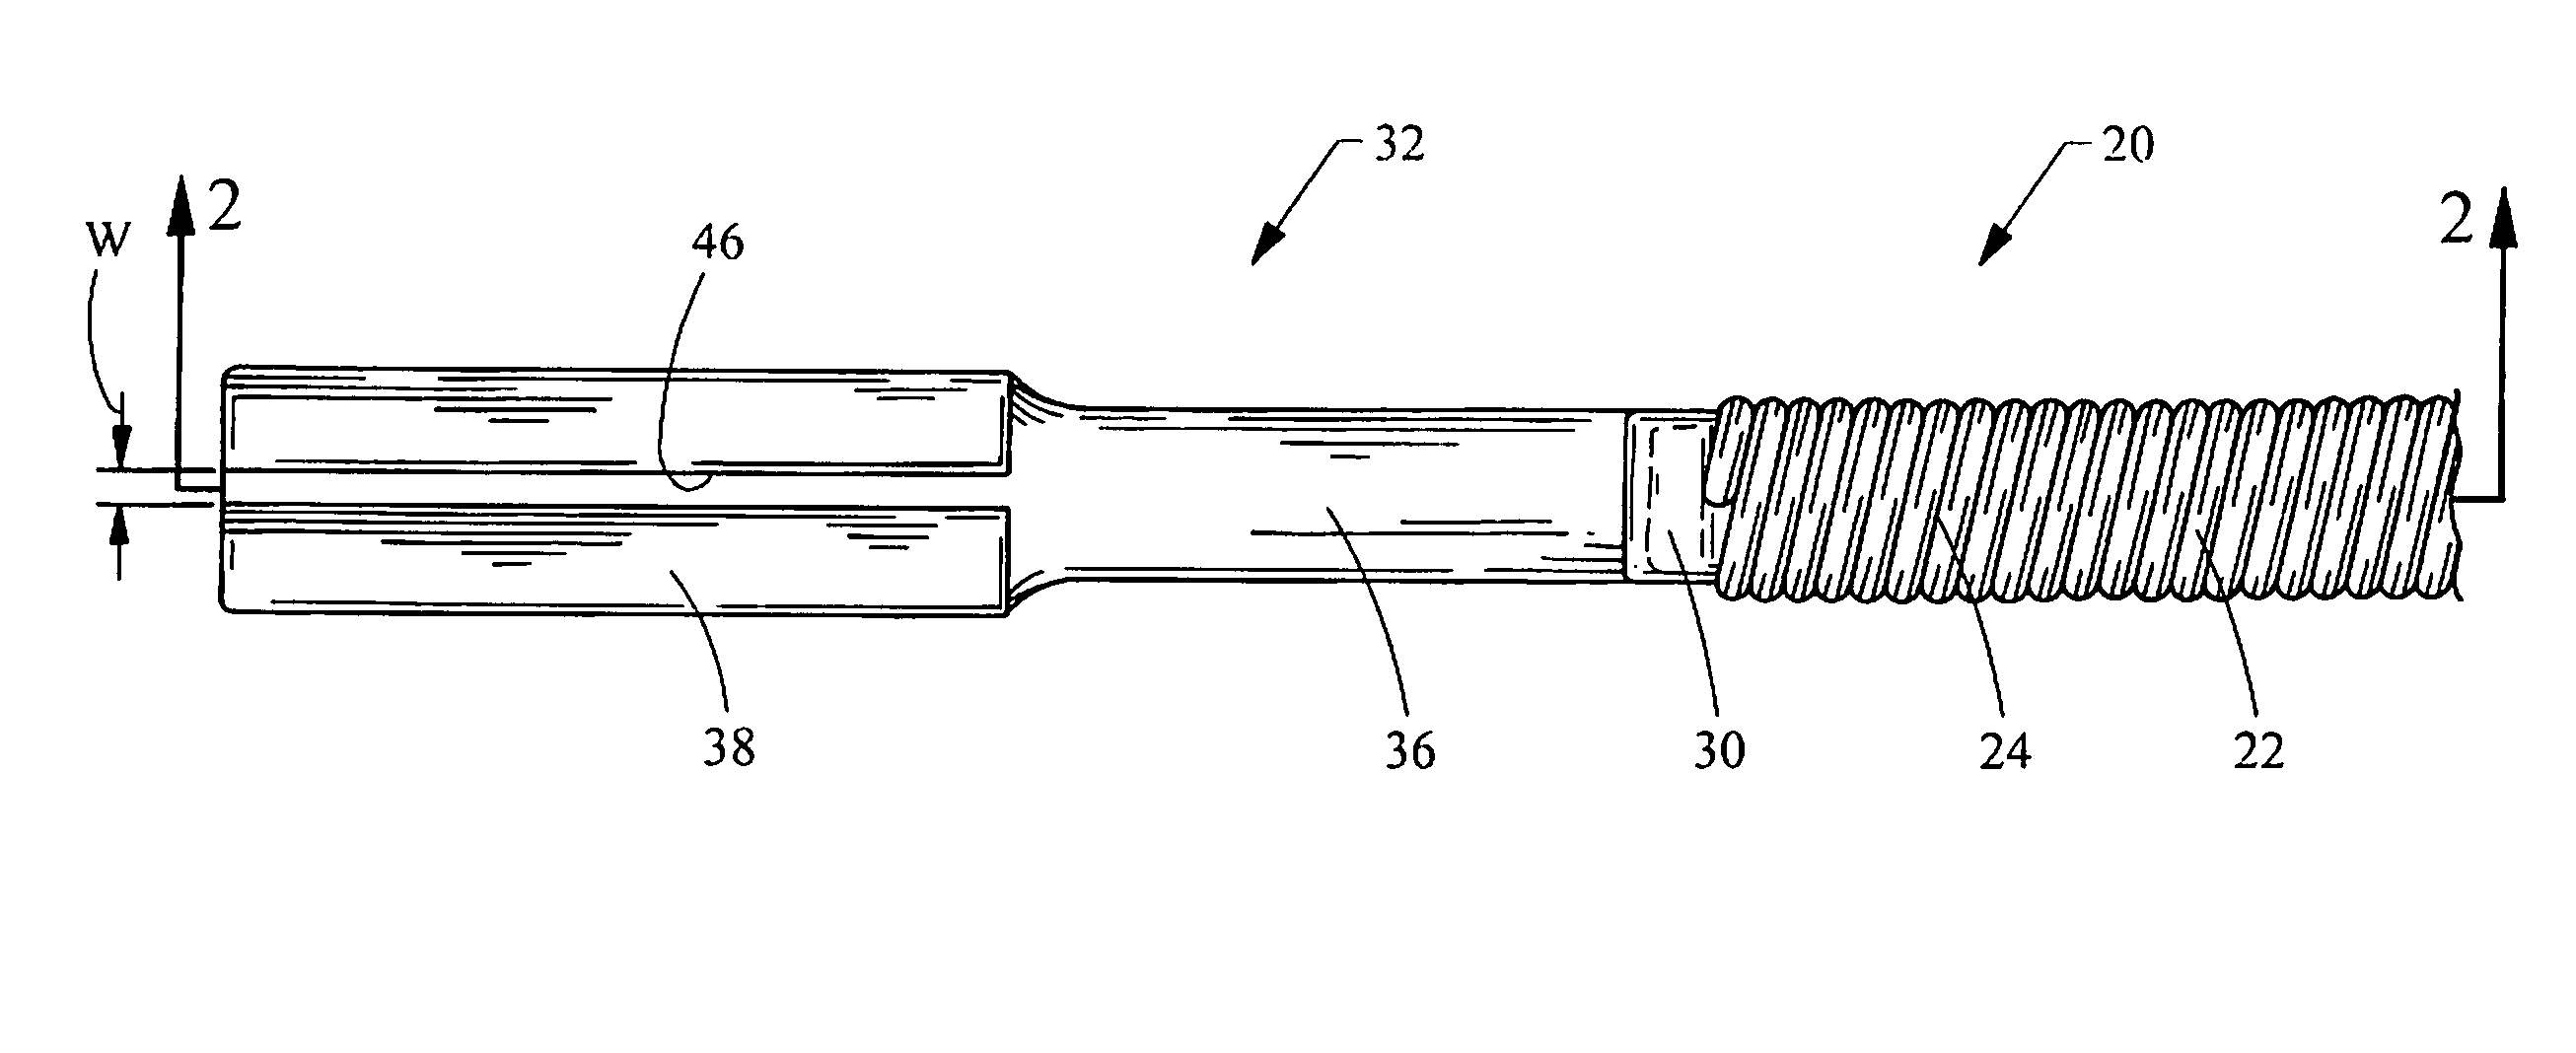 Wire guide having distal coupling tip for attachment to a previously introduced wire guide